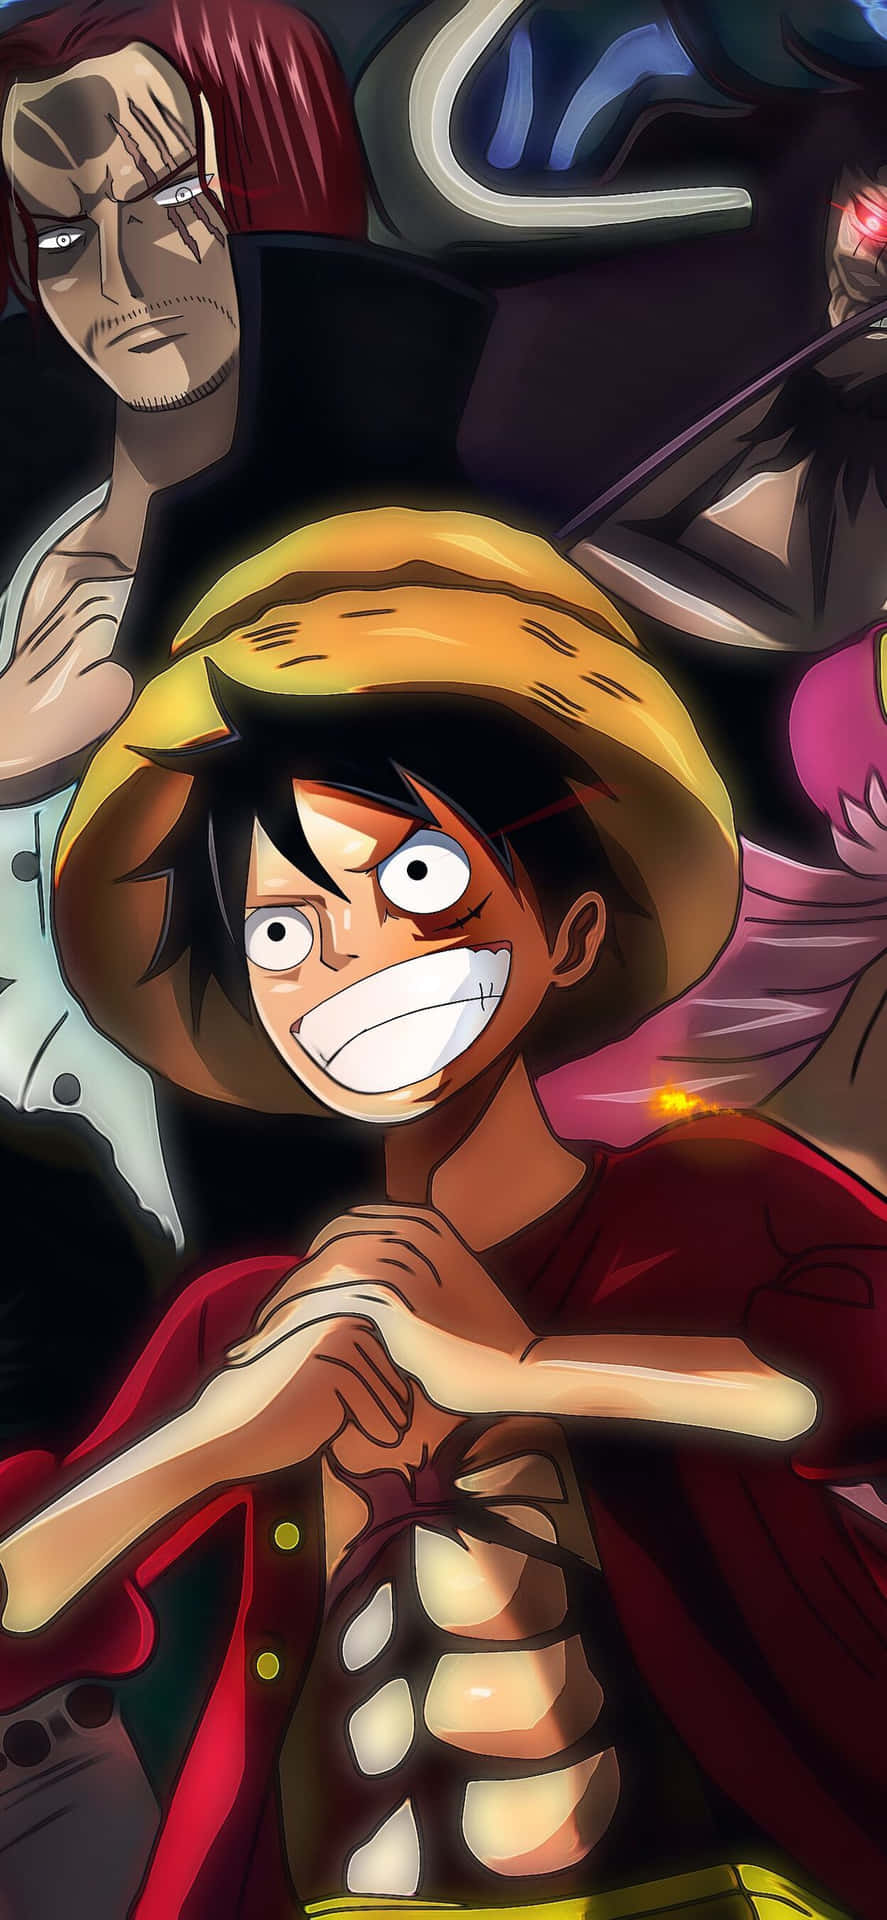 Luffy leads the Straw Hat Pirates in the universe of One Piece 🎉 Wallpaper